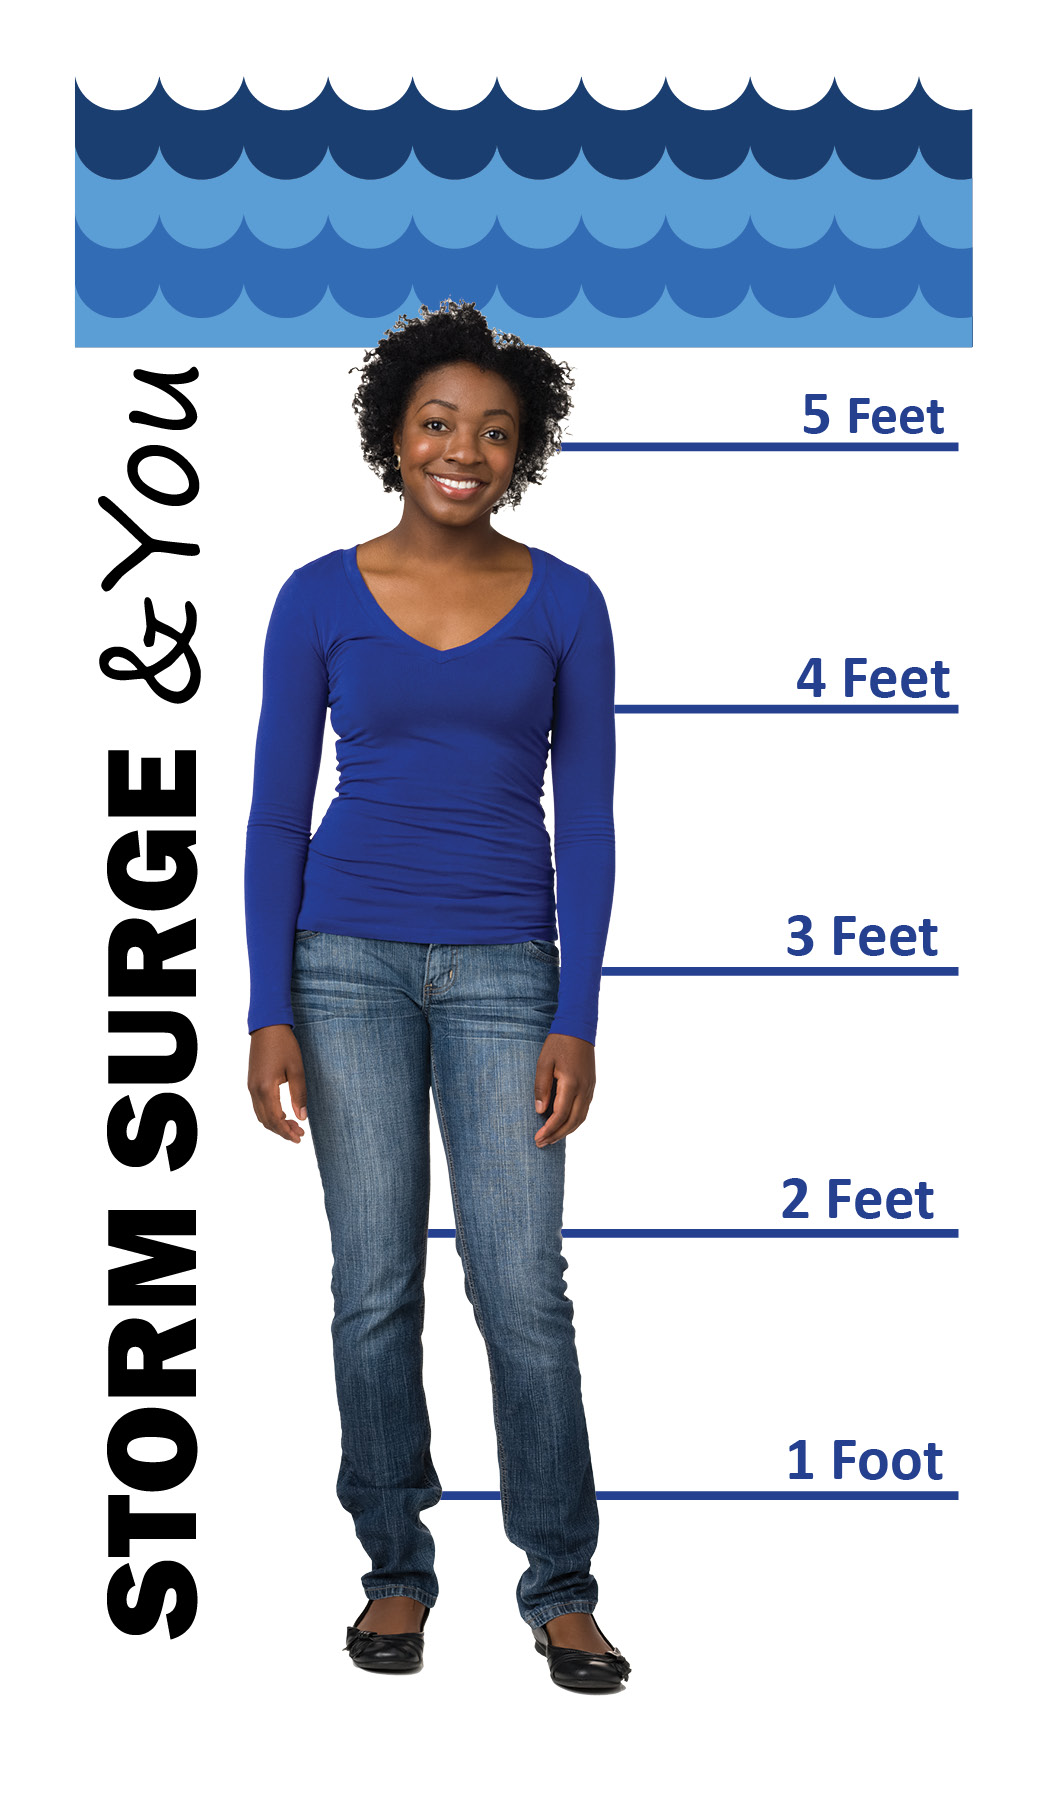 Graphic comparison of an average height person and storm surge levels